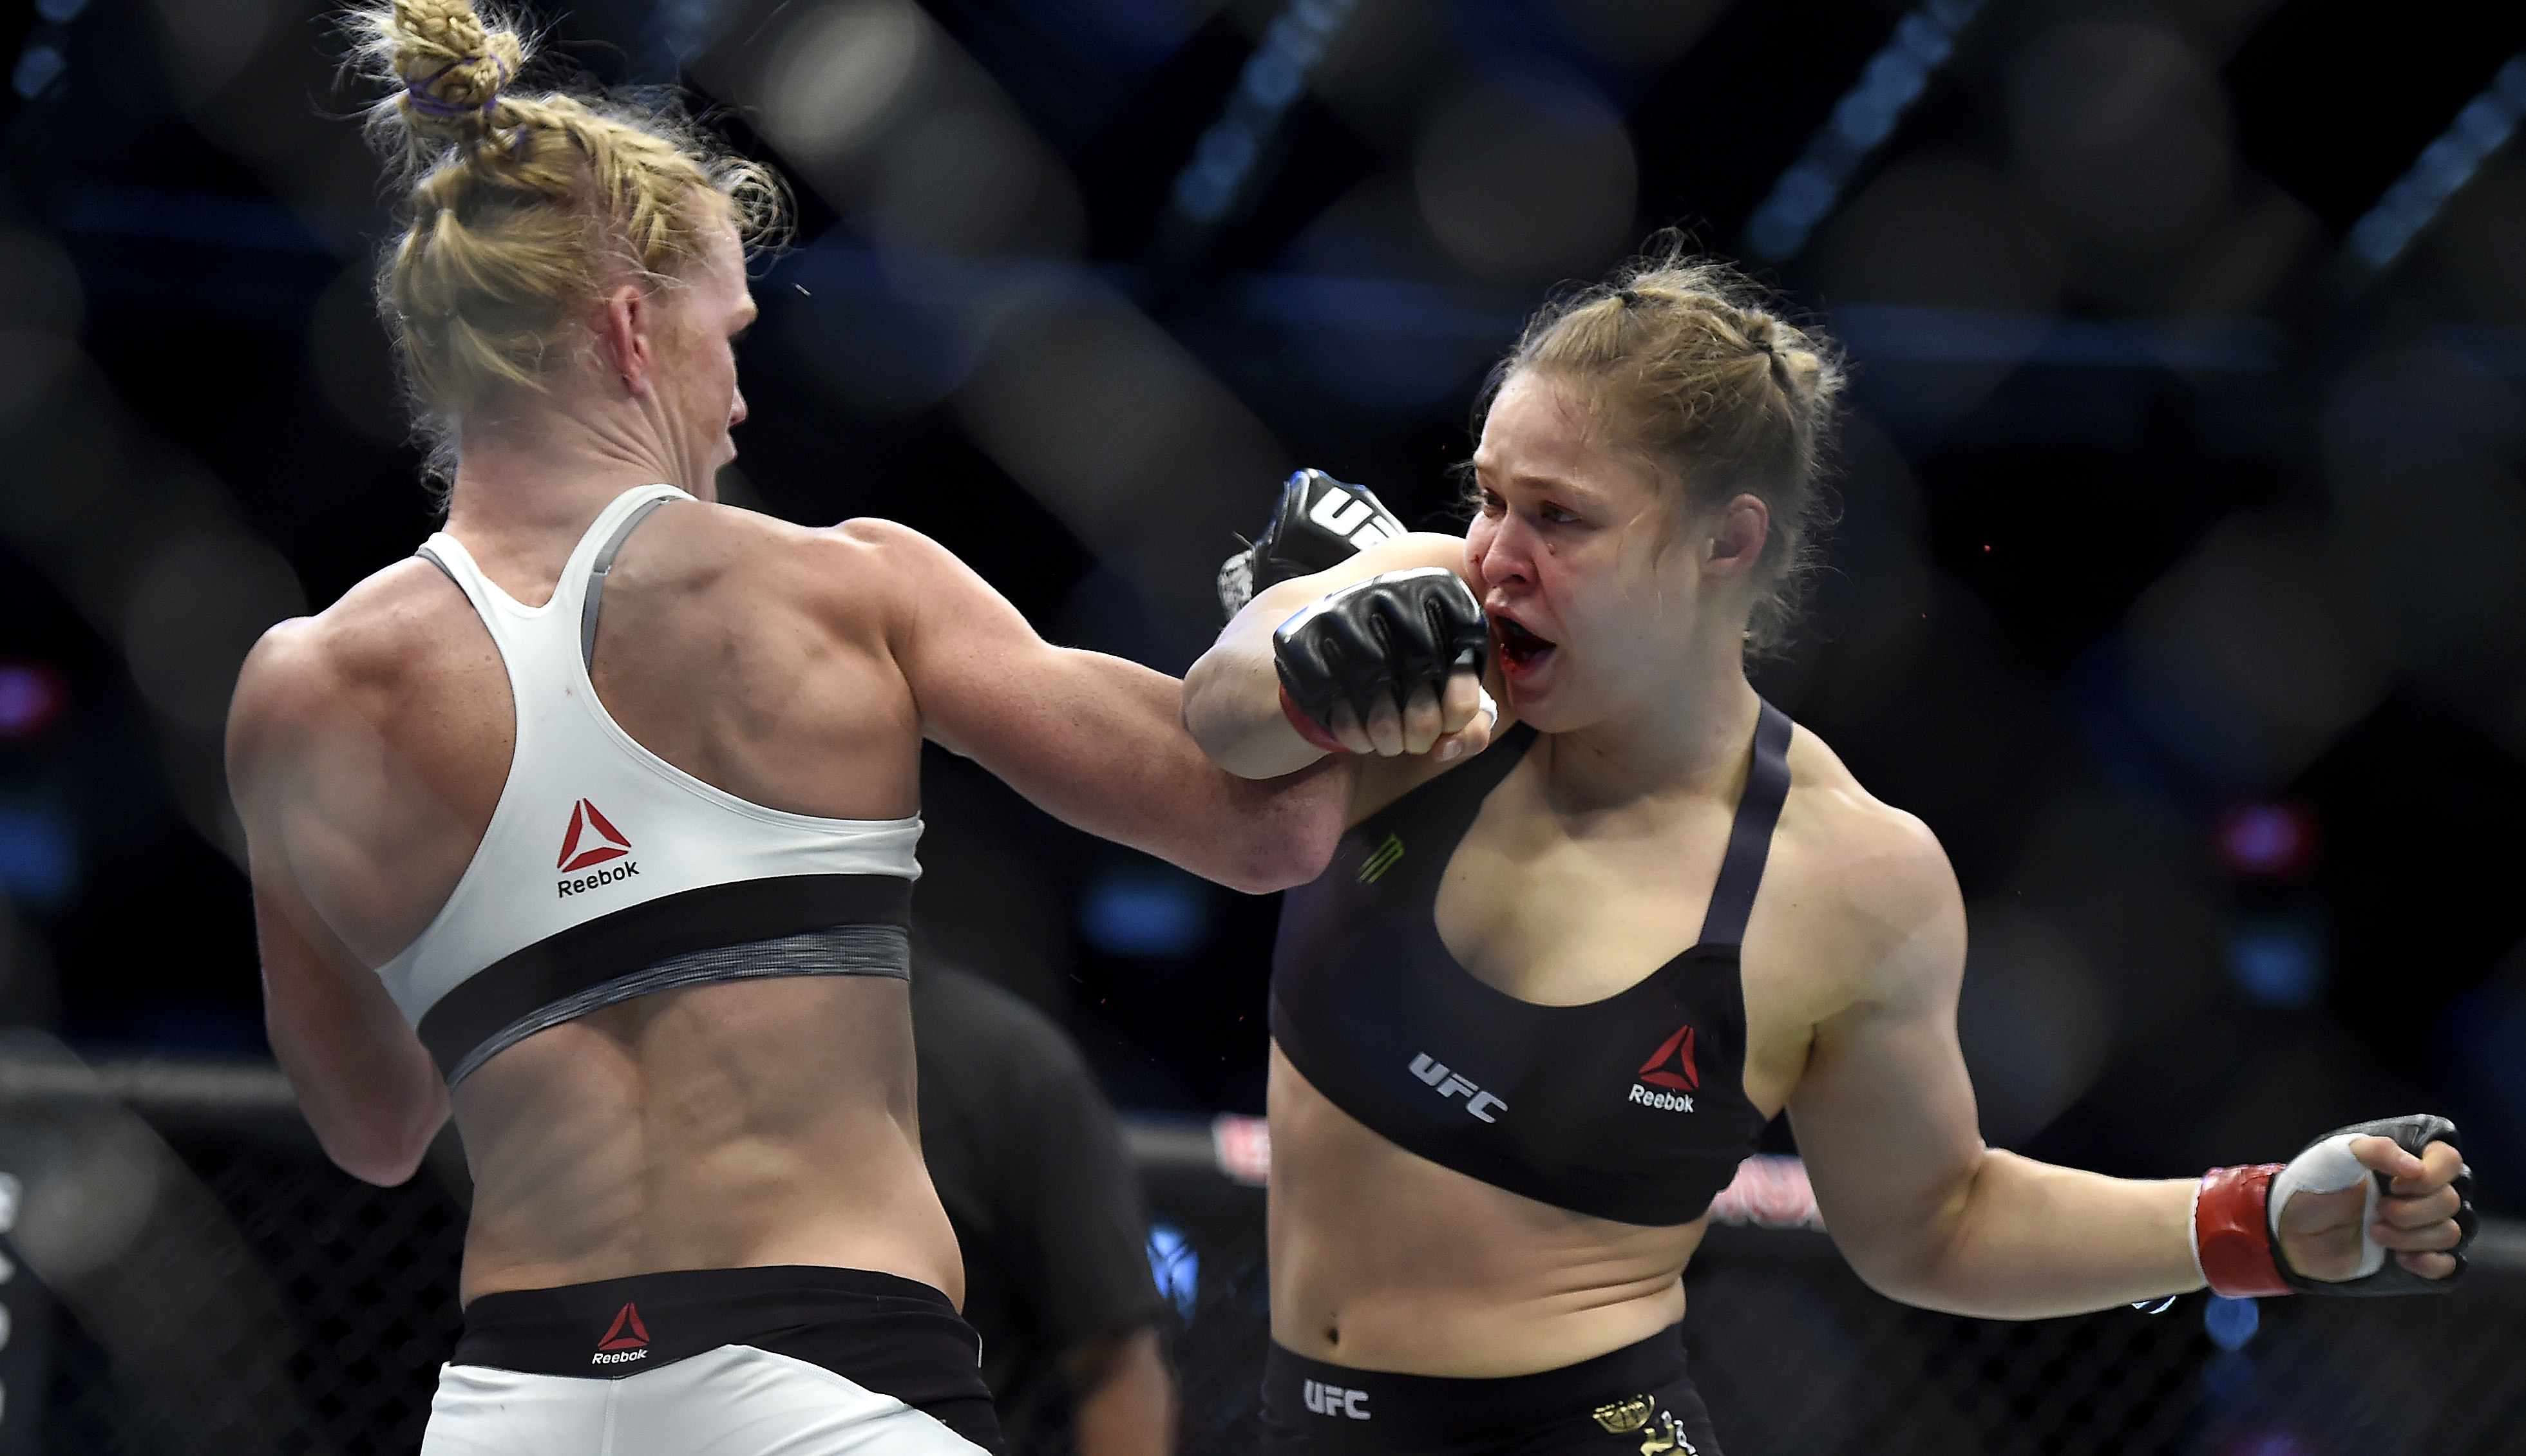 Ronda Rousey S Championship Streak Ends With Knockout Loss To Holly Holm Washington Times